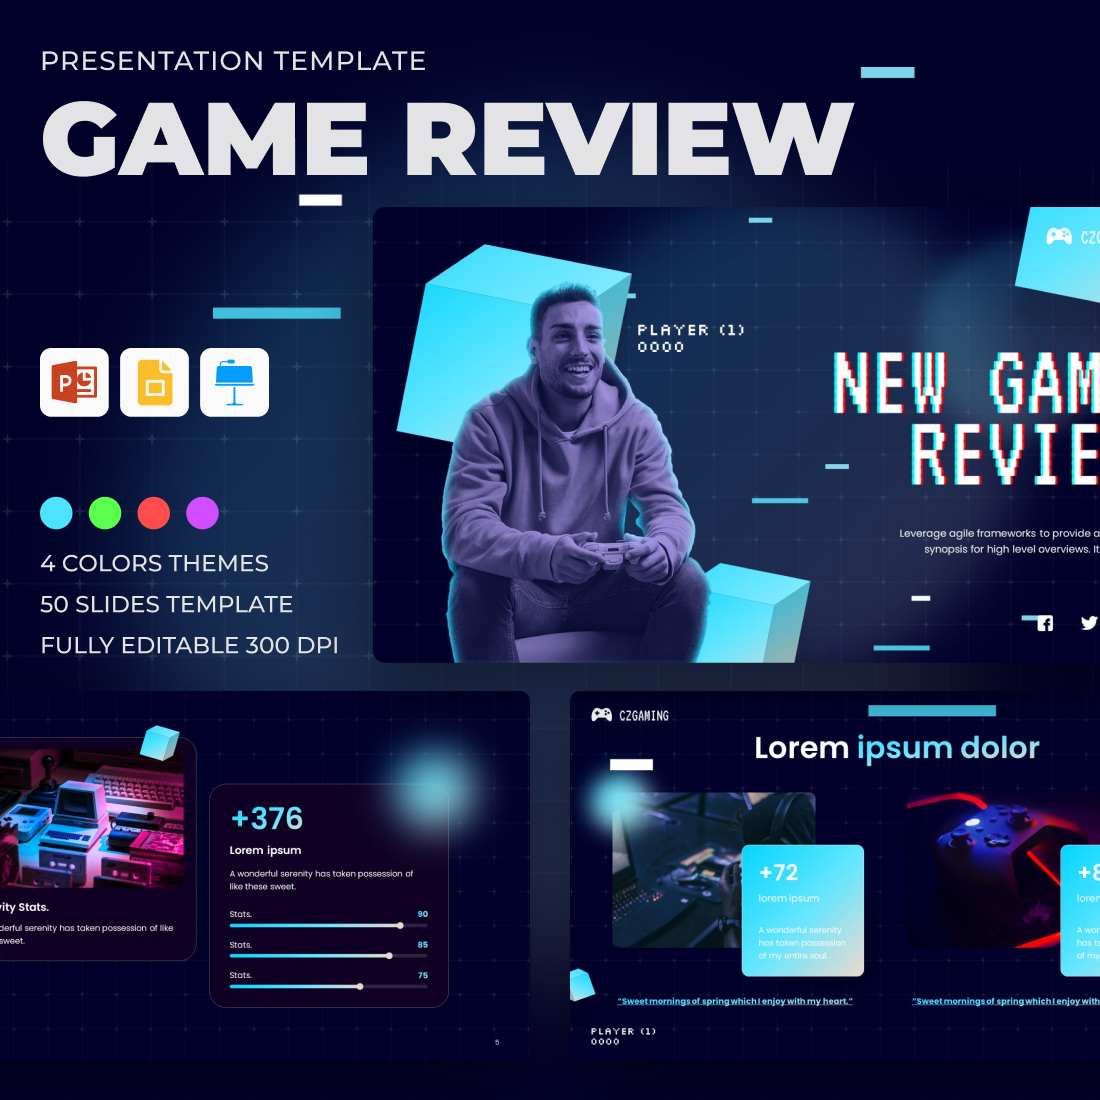 Illustrations with game review presentation template.